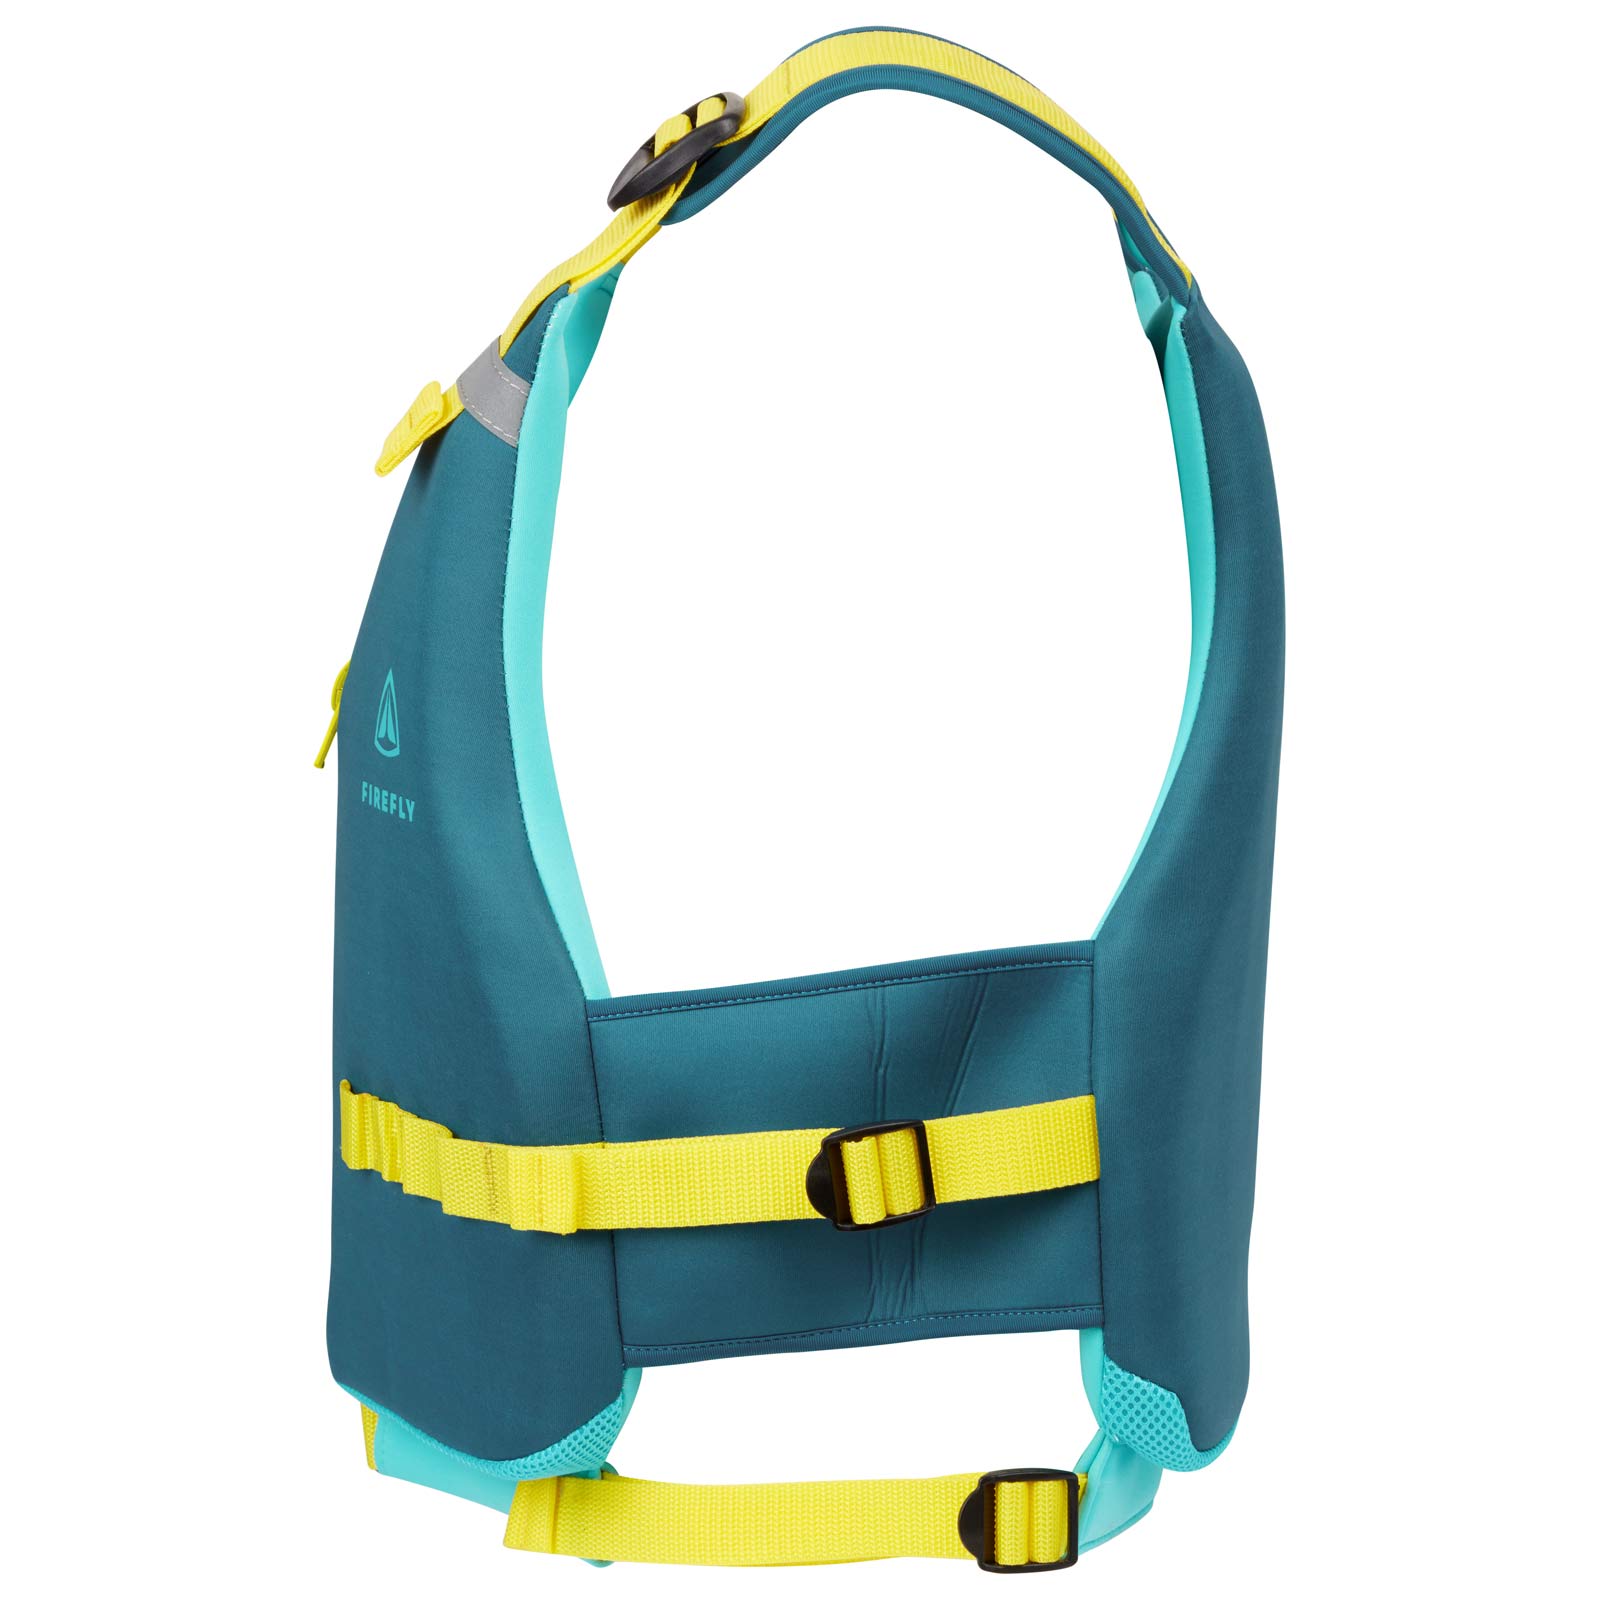 FIREFLY SUP TOURING VEST SWIMMING BUOYANCY AID